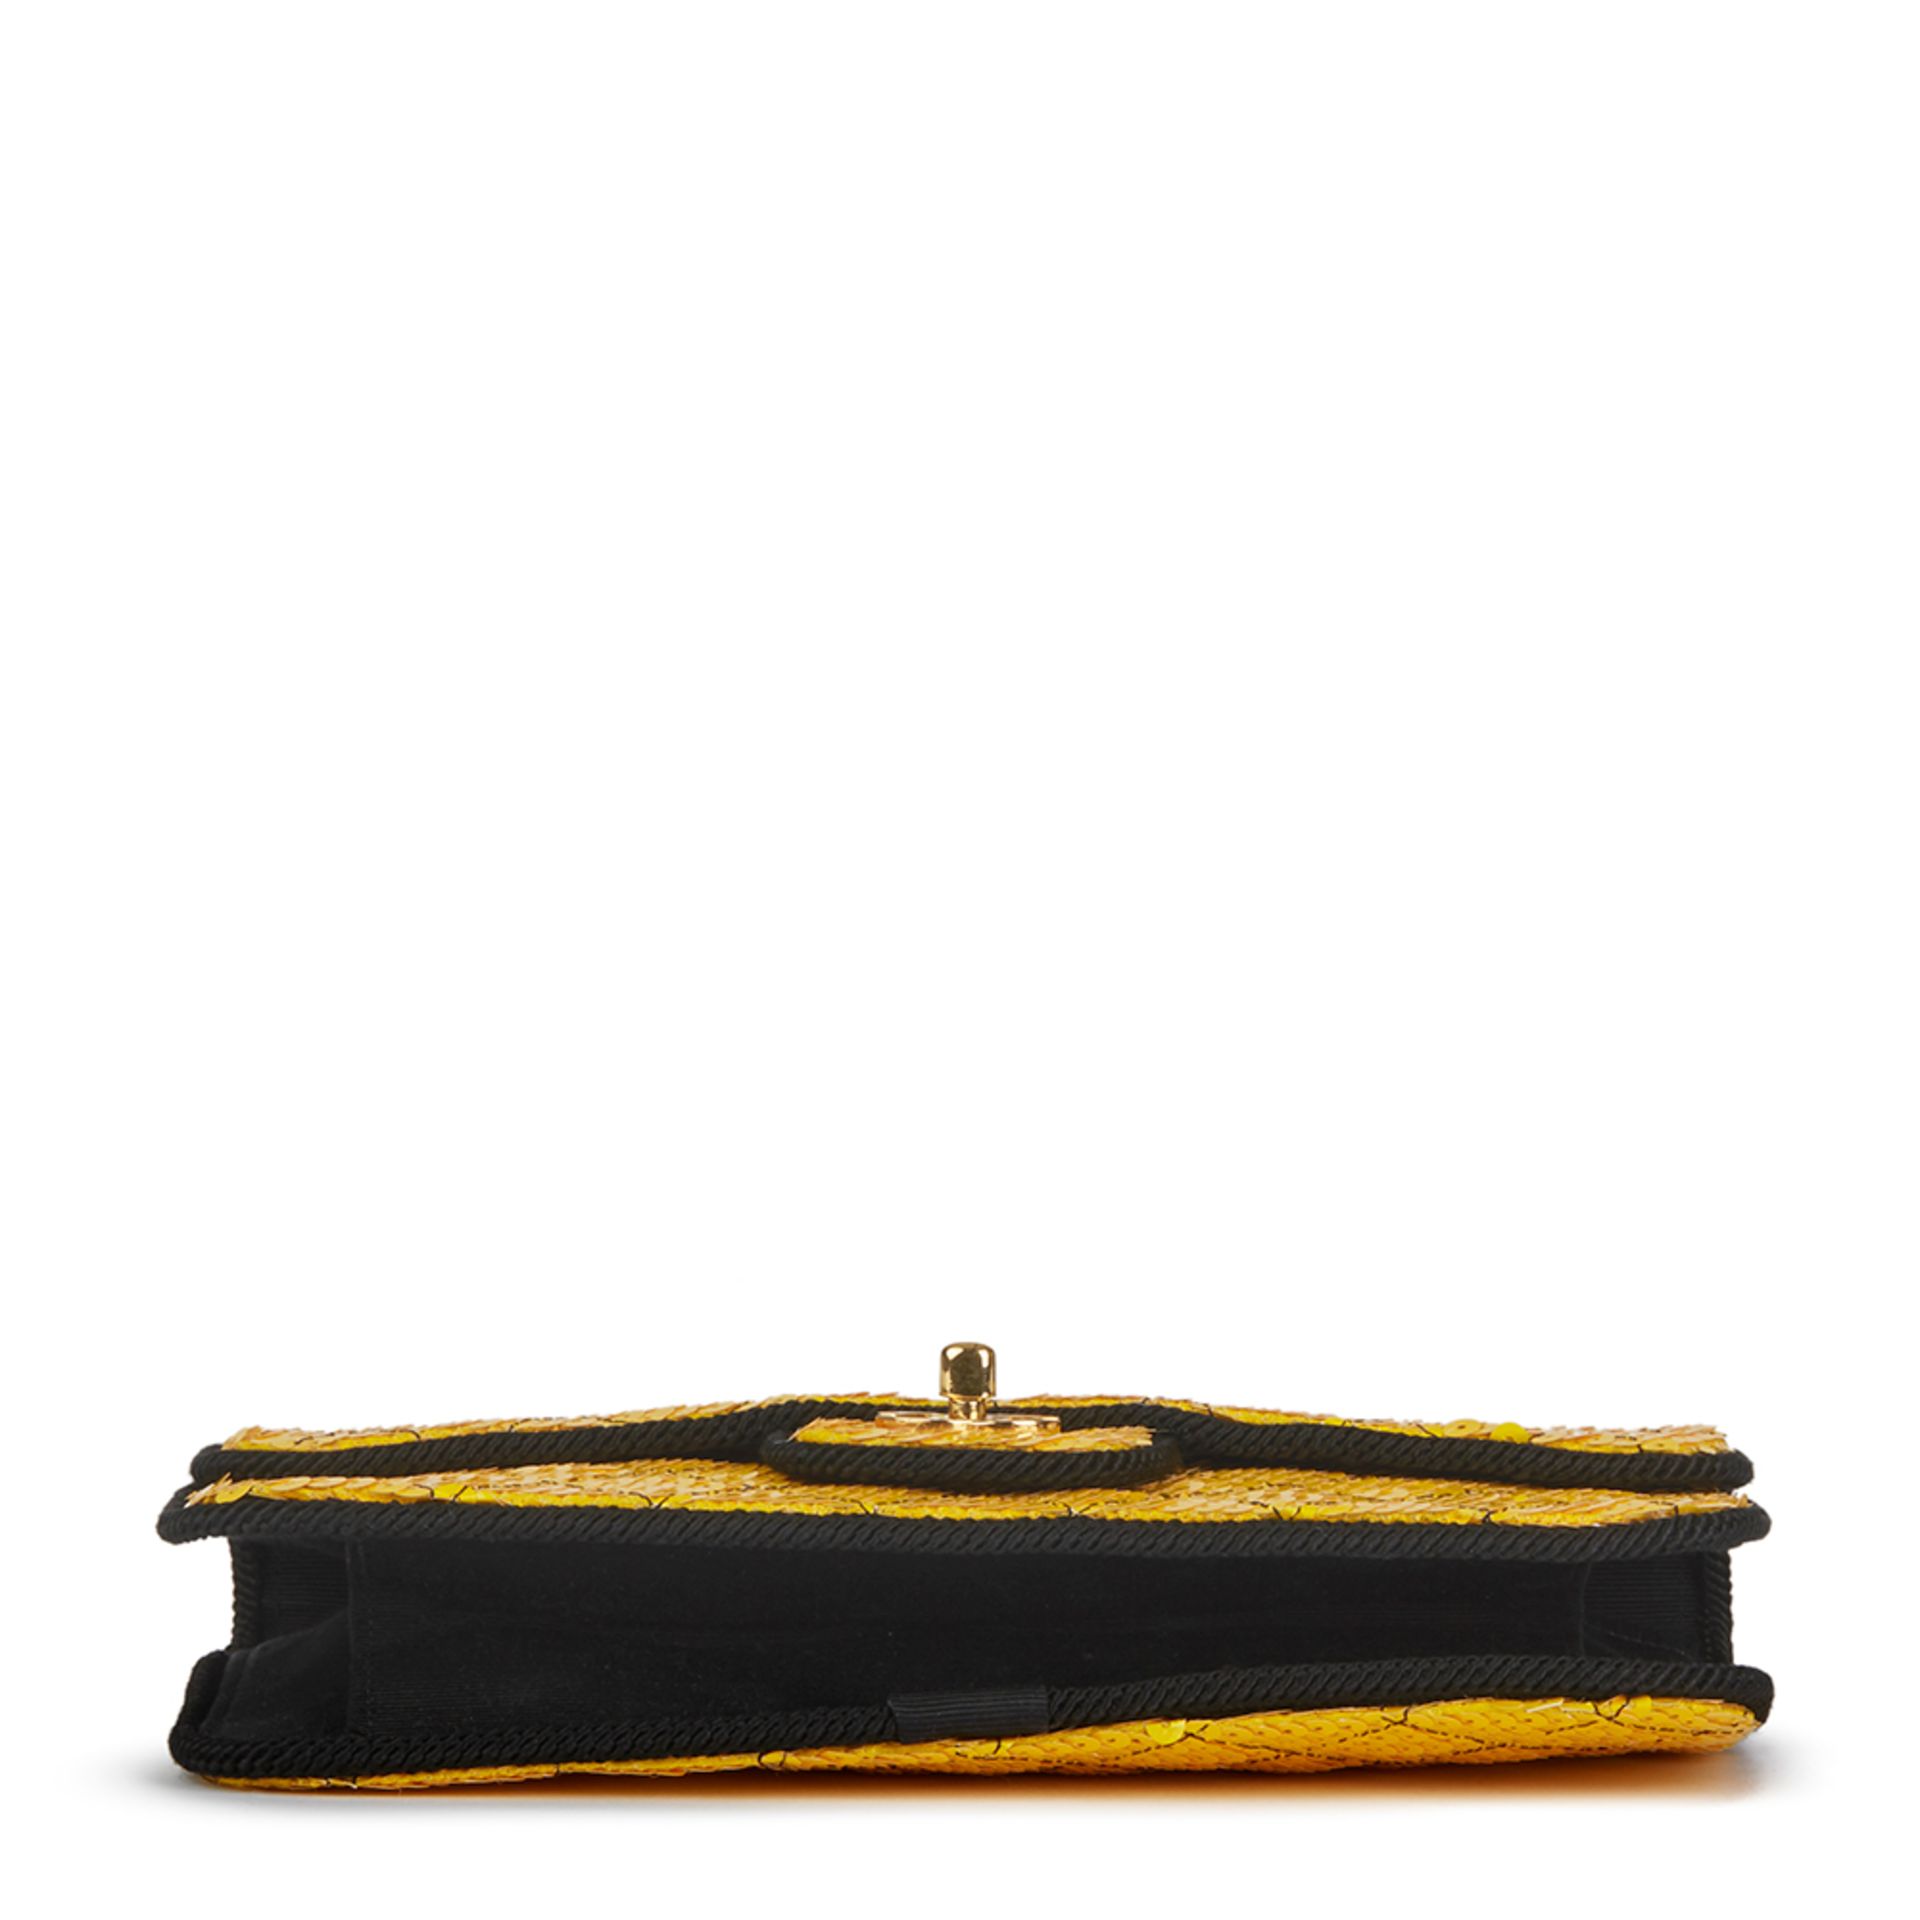 Chanel Yellow Quilted Sequin & Black Fabric Embellished Vintage Classic Single Flap Bag - Image 10 of 13